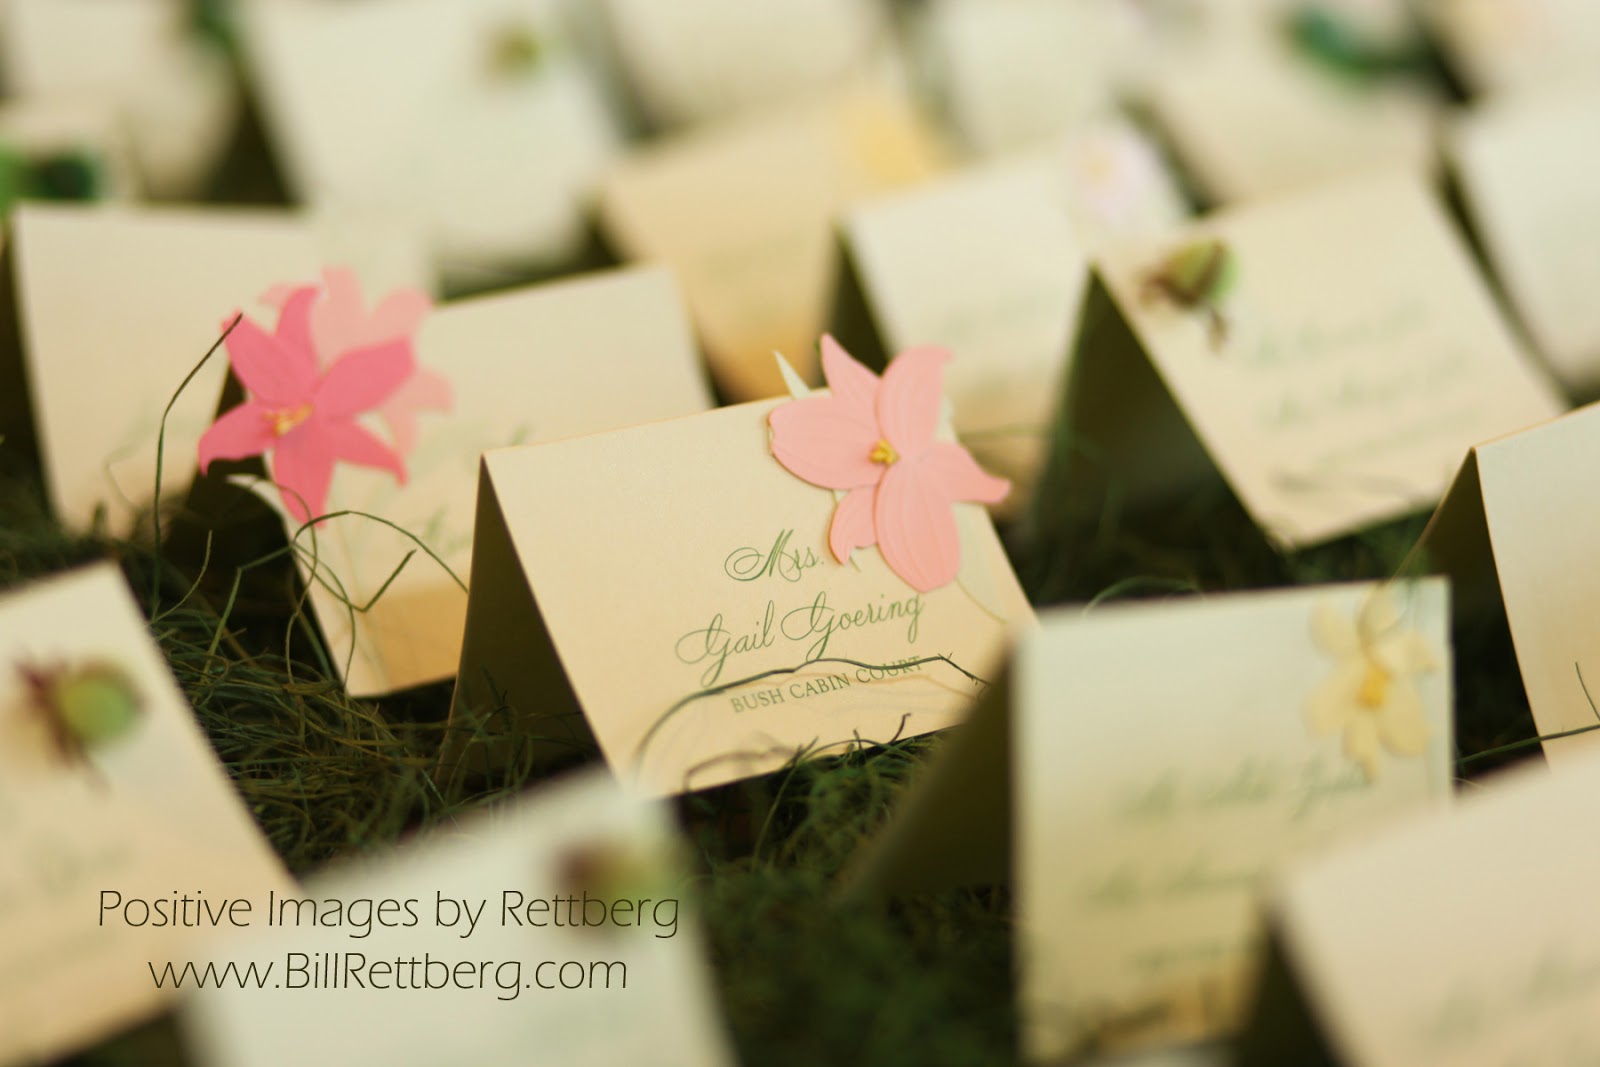 seating-cards-for-a-garden-party-wedding-kindly-rsvp-designs